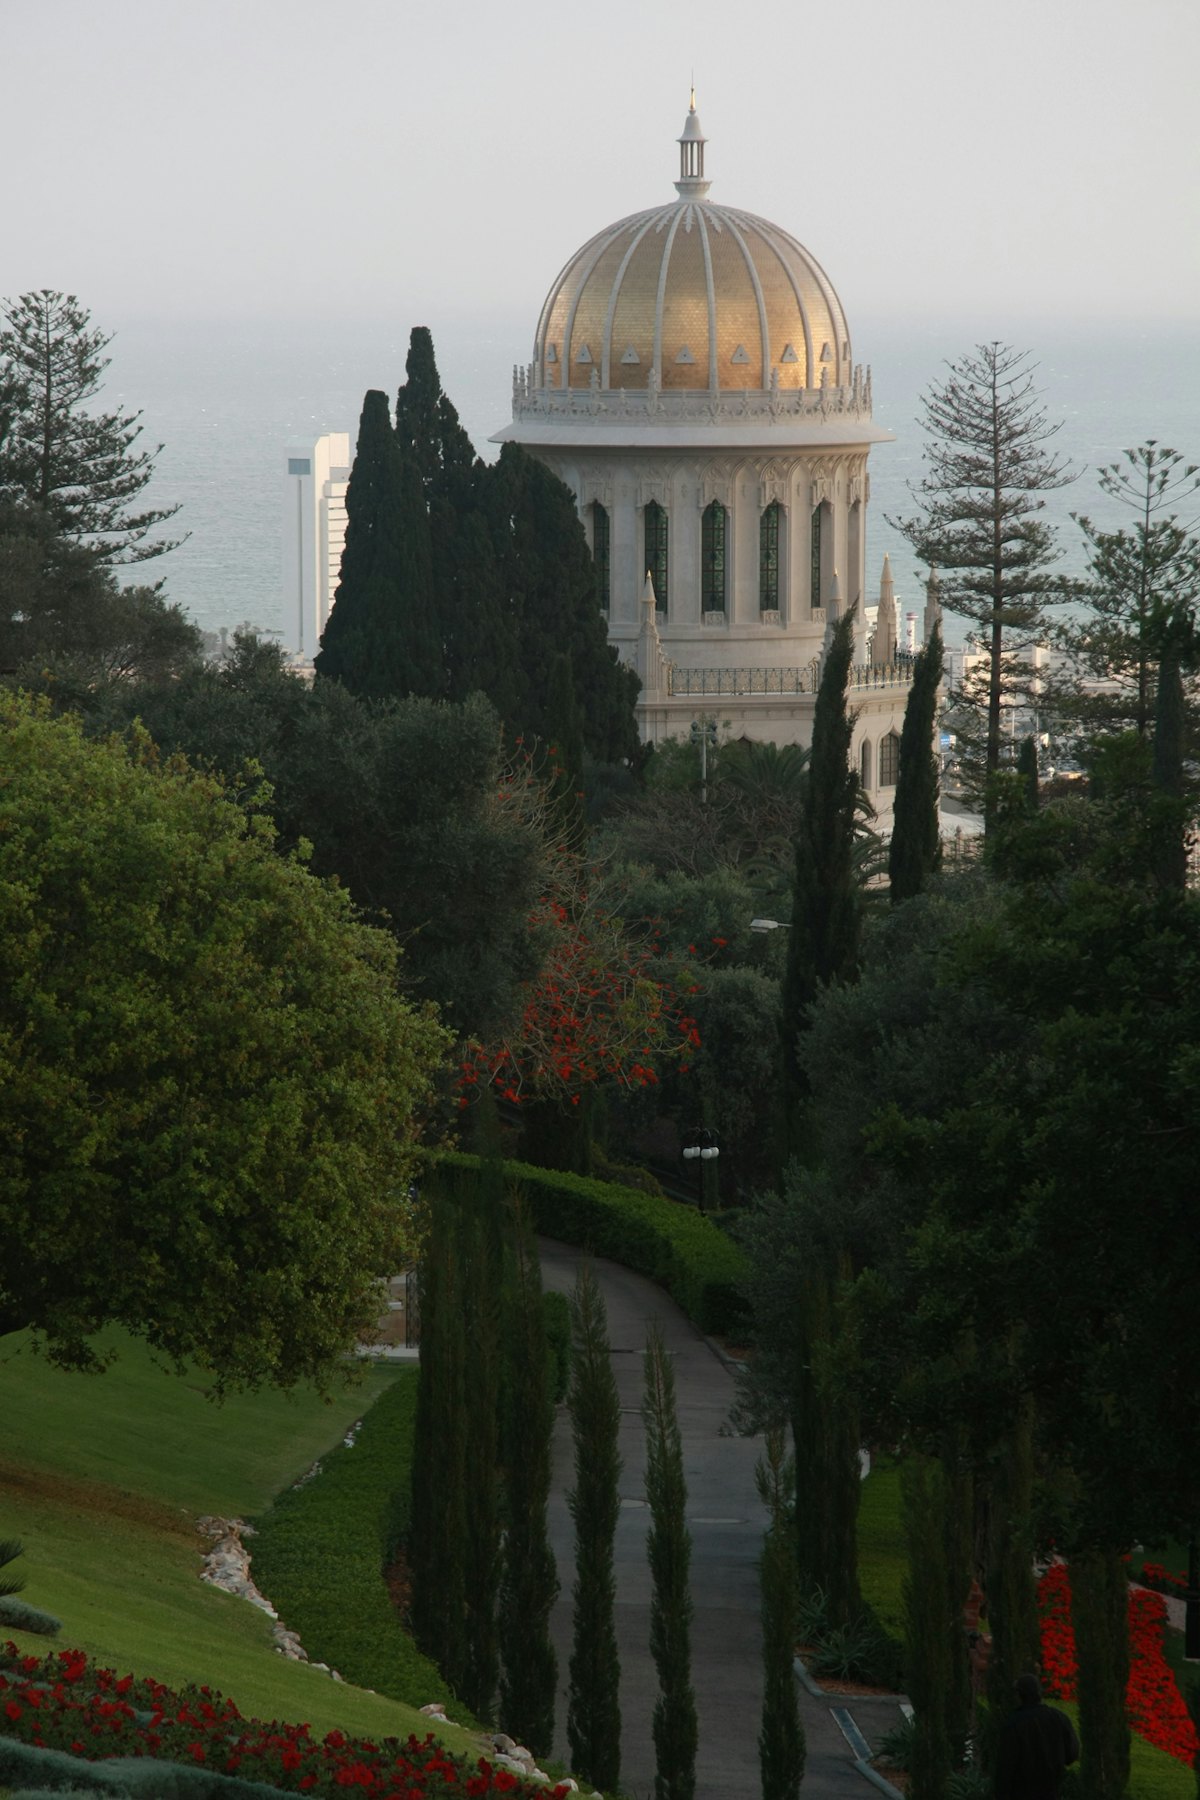 The Shrine of the Bab viewed from the complex of Baha'i administrative buildings on Mount Carmel. New techniques had to be developed to replace the Shrine's 11,790 golden tiles, in more than 120 different shapes and sizes. Master mason Bruce Hancock from New Zealand described the restored Shrine as "an awesome sight." Photo credit: Baha’i World Centre photo. All rights reserved.